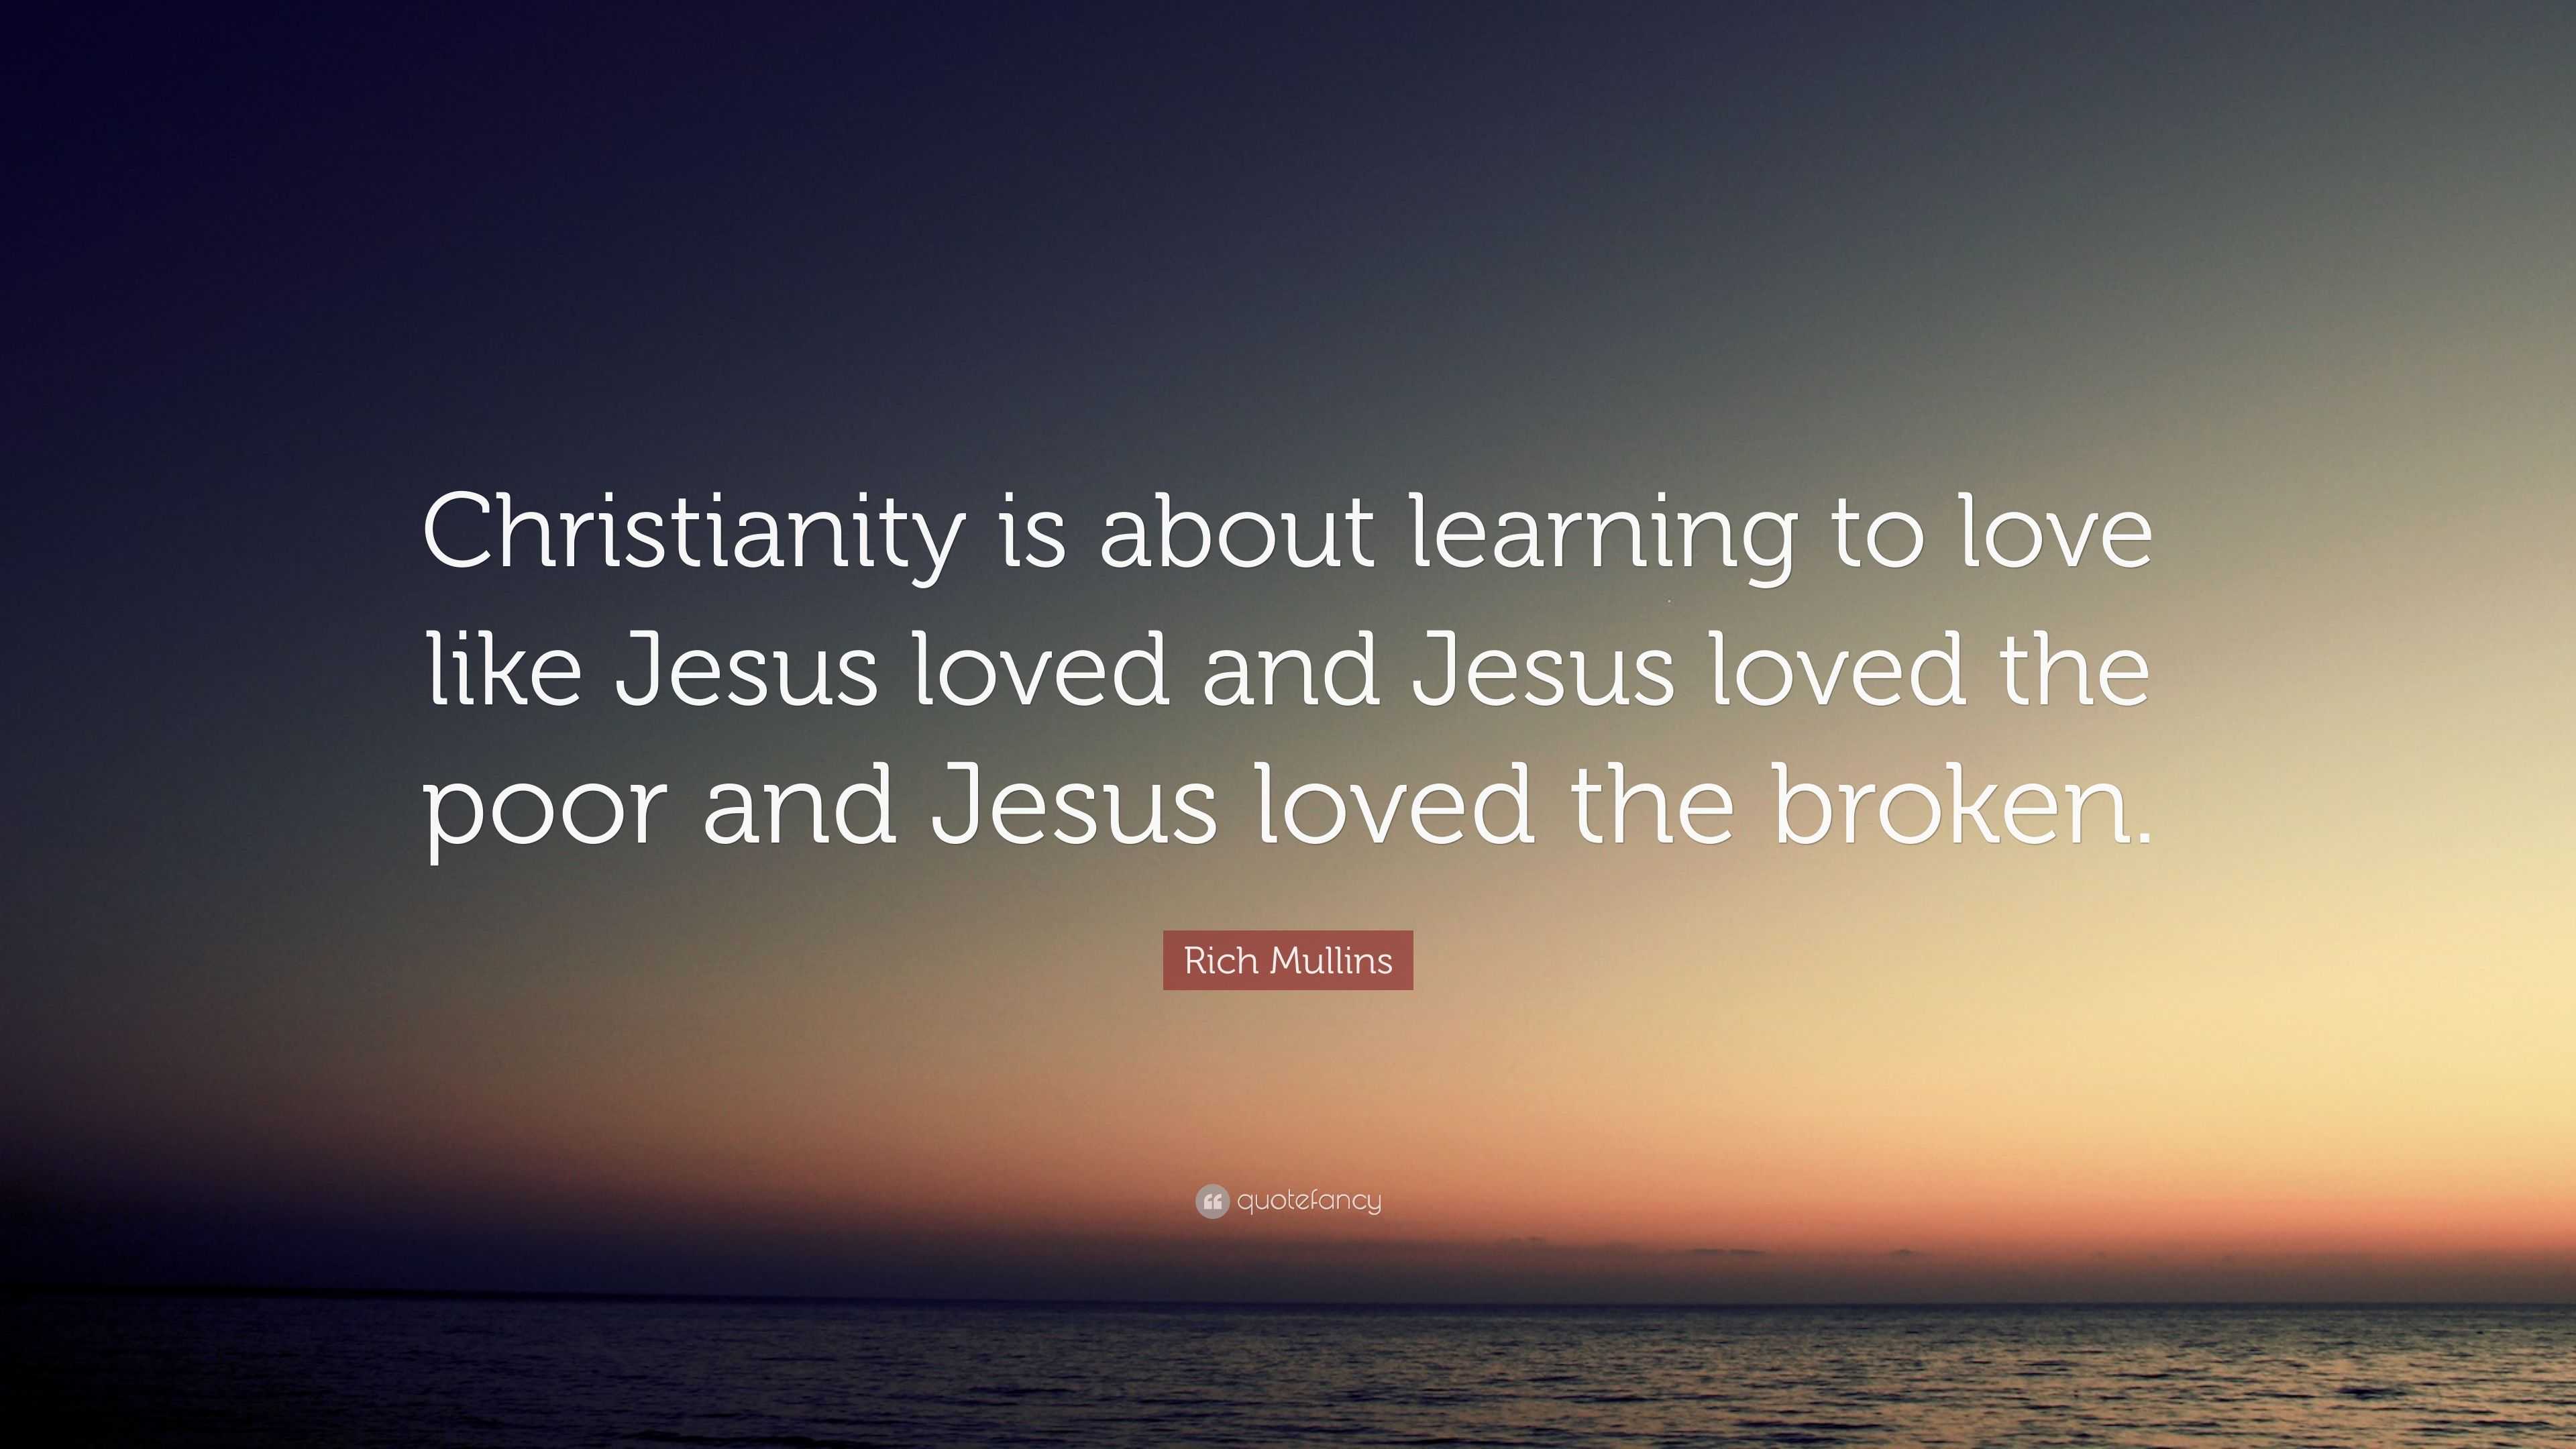 Rich Mullins Quote “Christianity is about learning to love like Jesus loved and Jesus